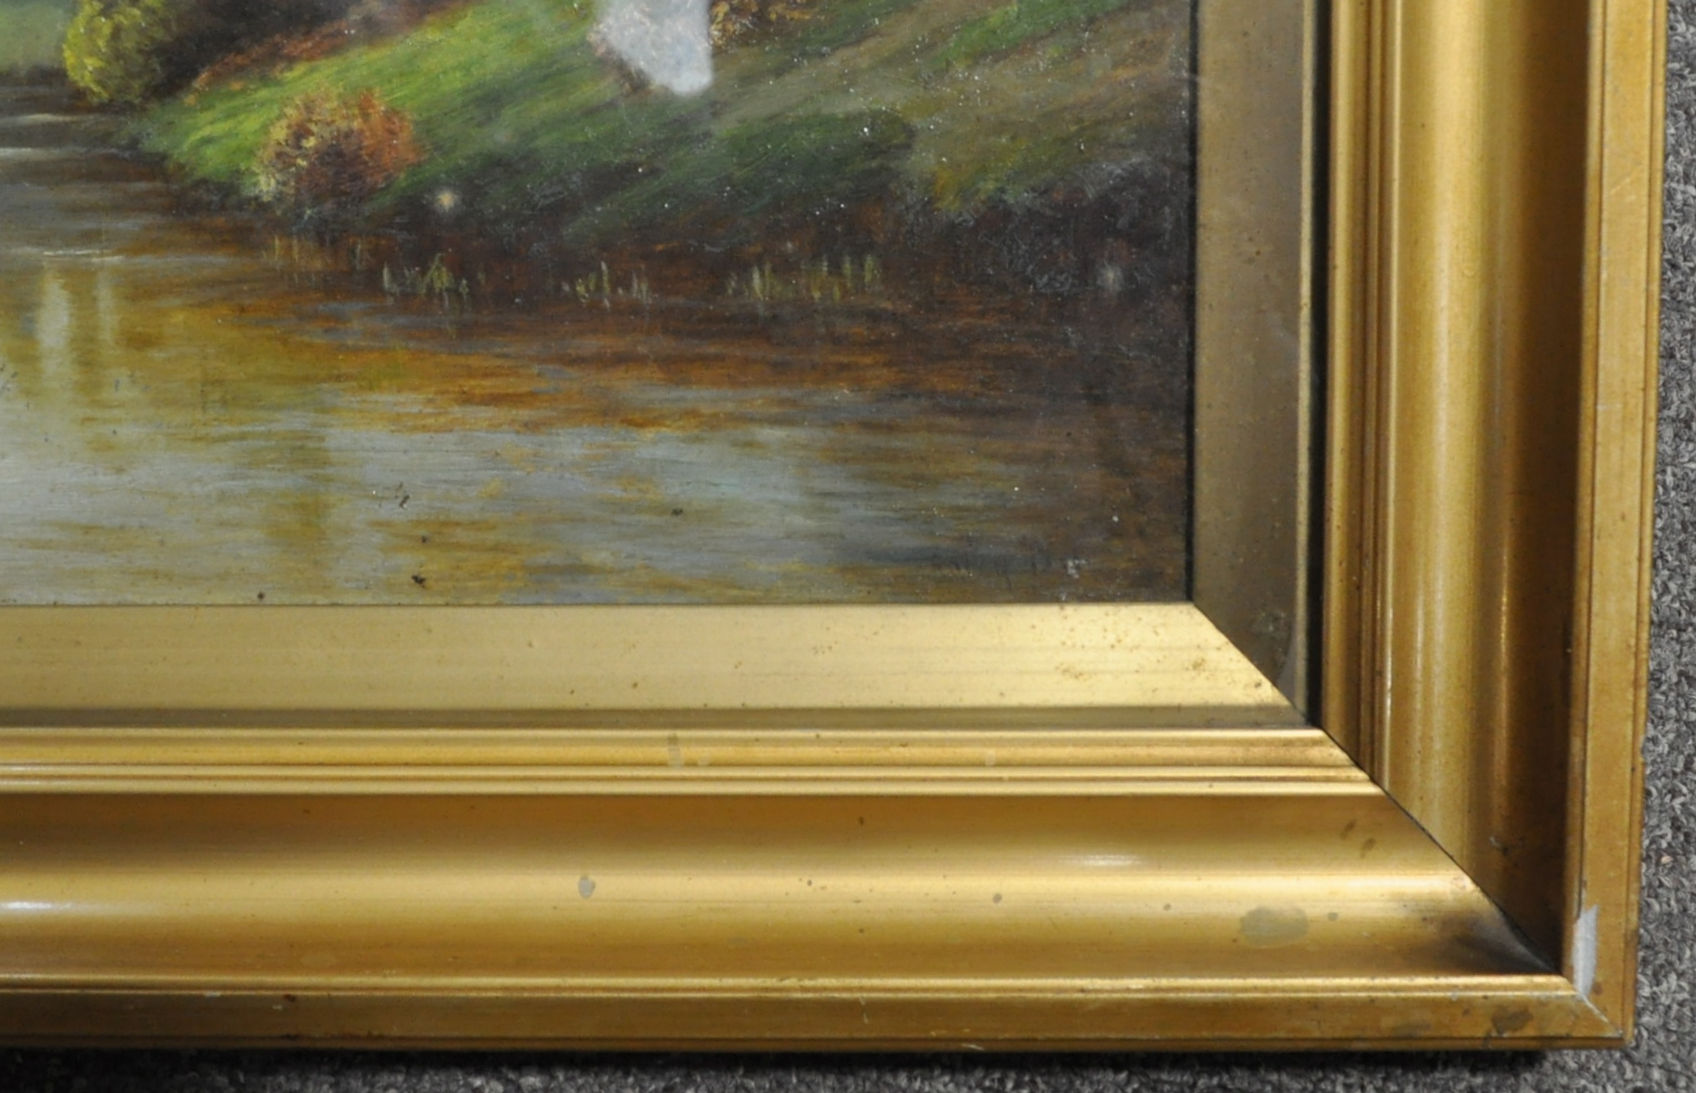 Acton Bett, River landscape, oil on board, signed lower right, - Image 2 of 3